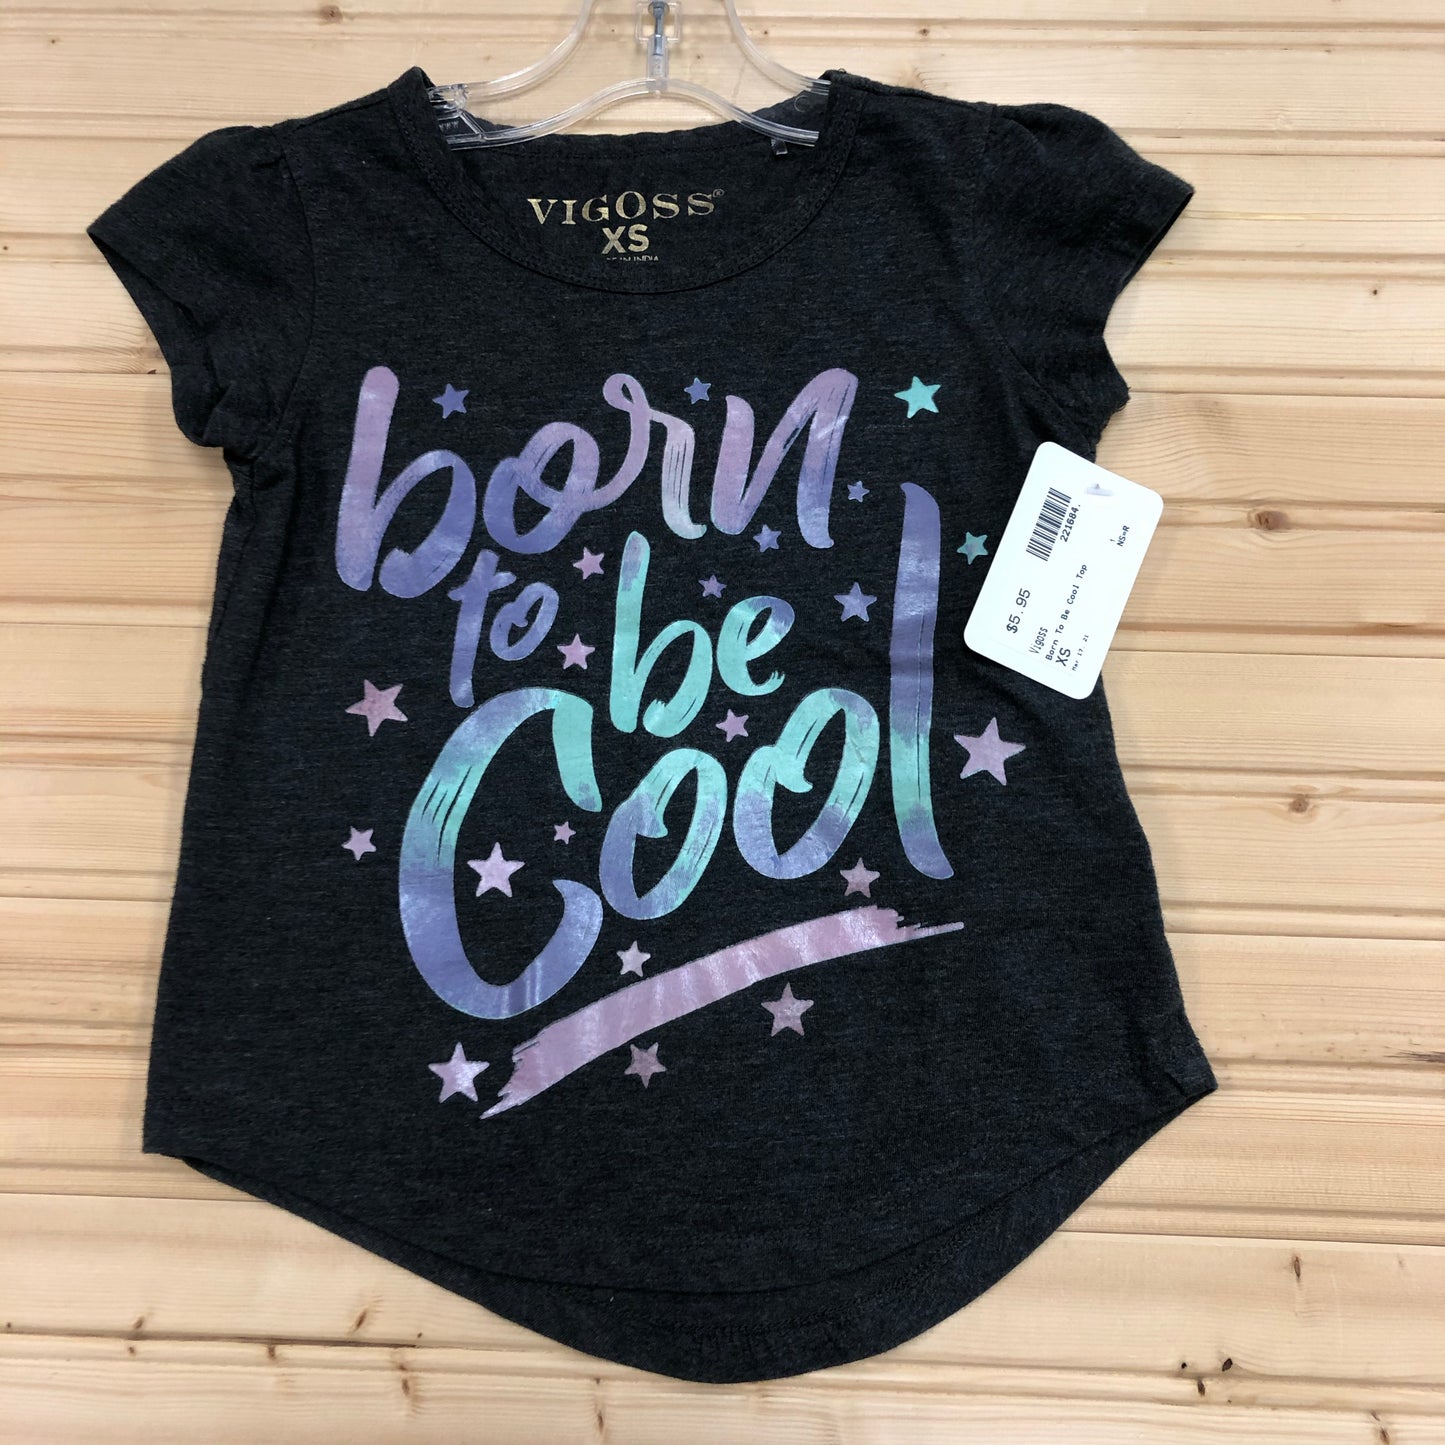 Born To Be Cool Top